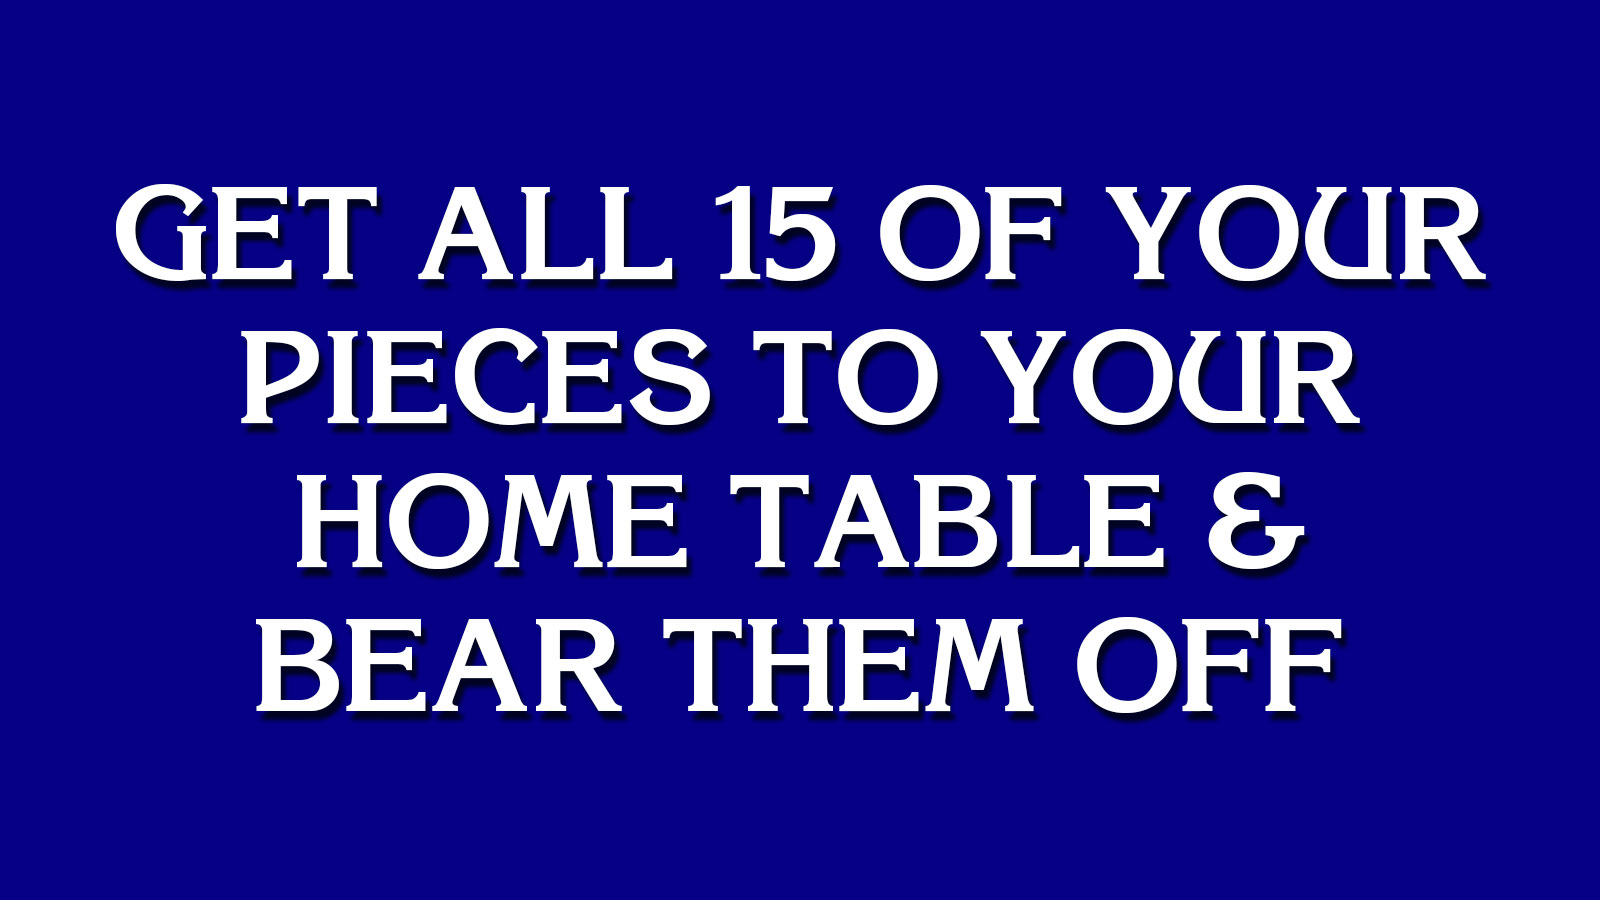 Are You Smarter Than a “Jeopardy!” Contestant? 12